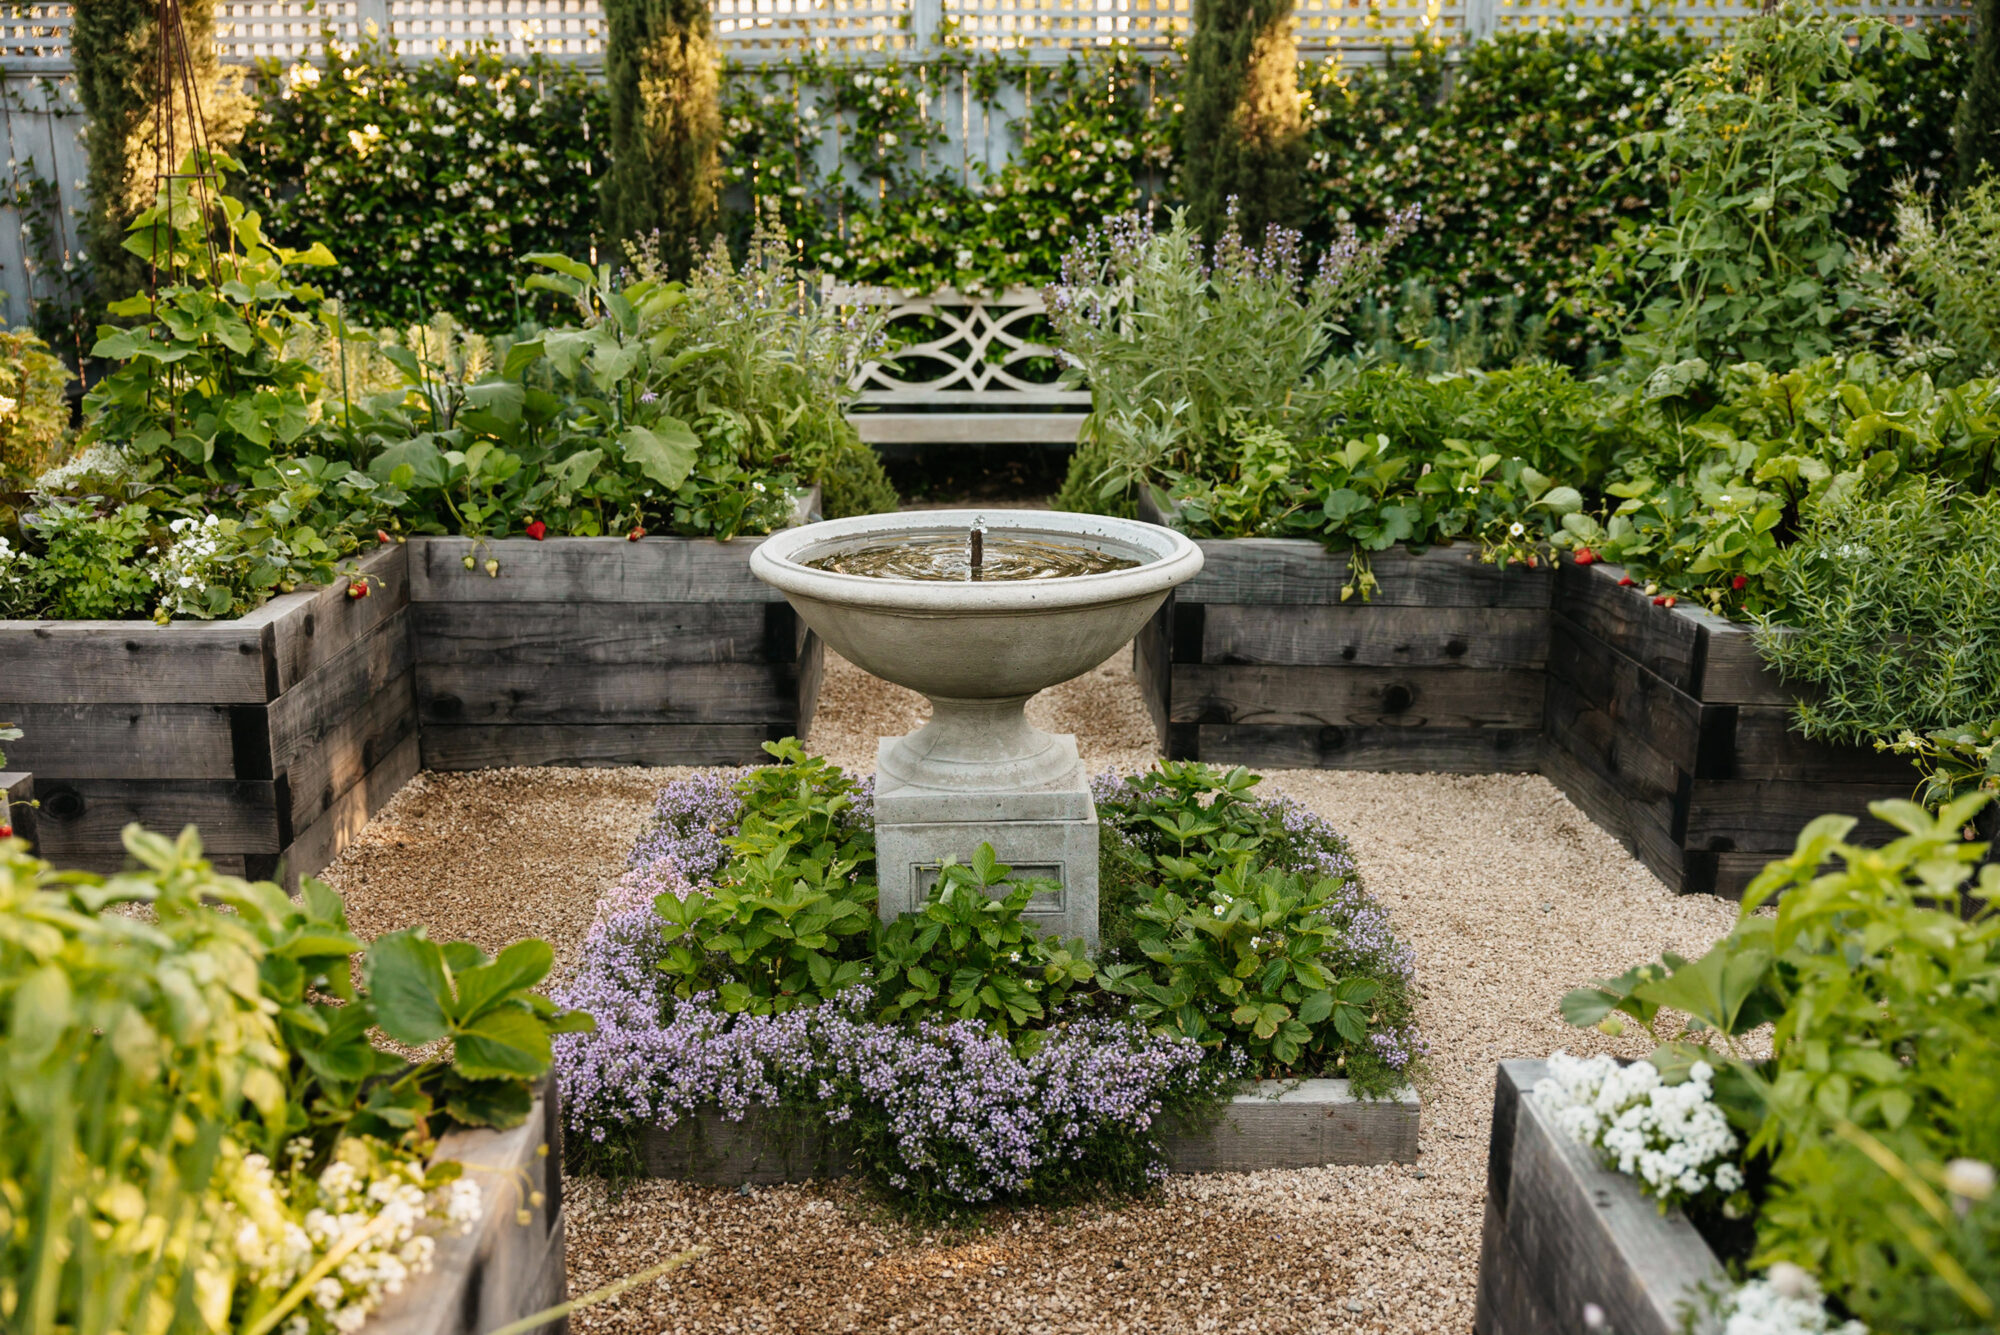 5 Easy DIY Raised Garden Bed Plans for a Bountiful Harvest